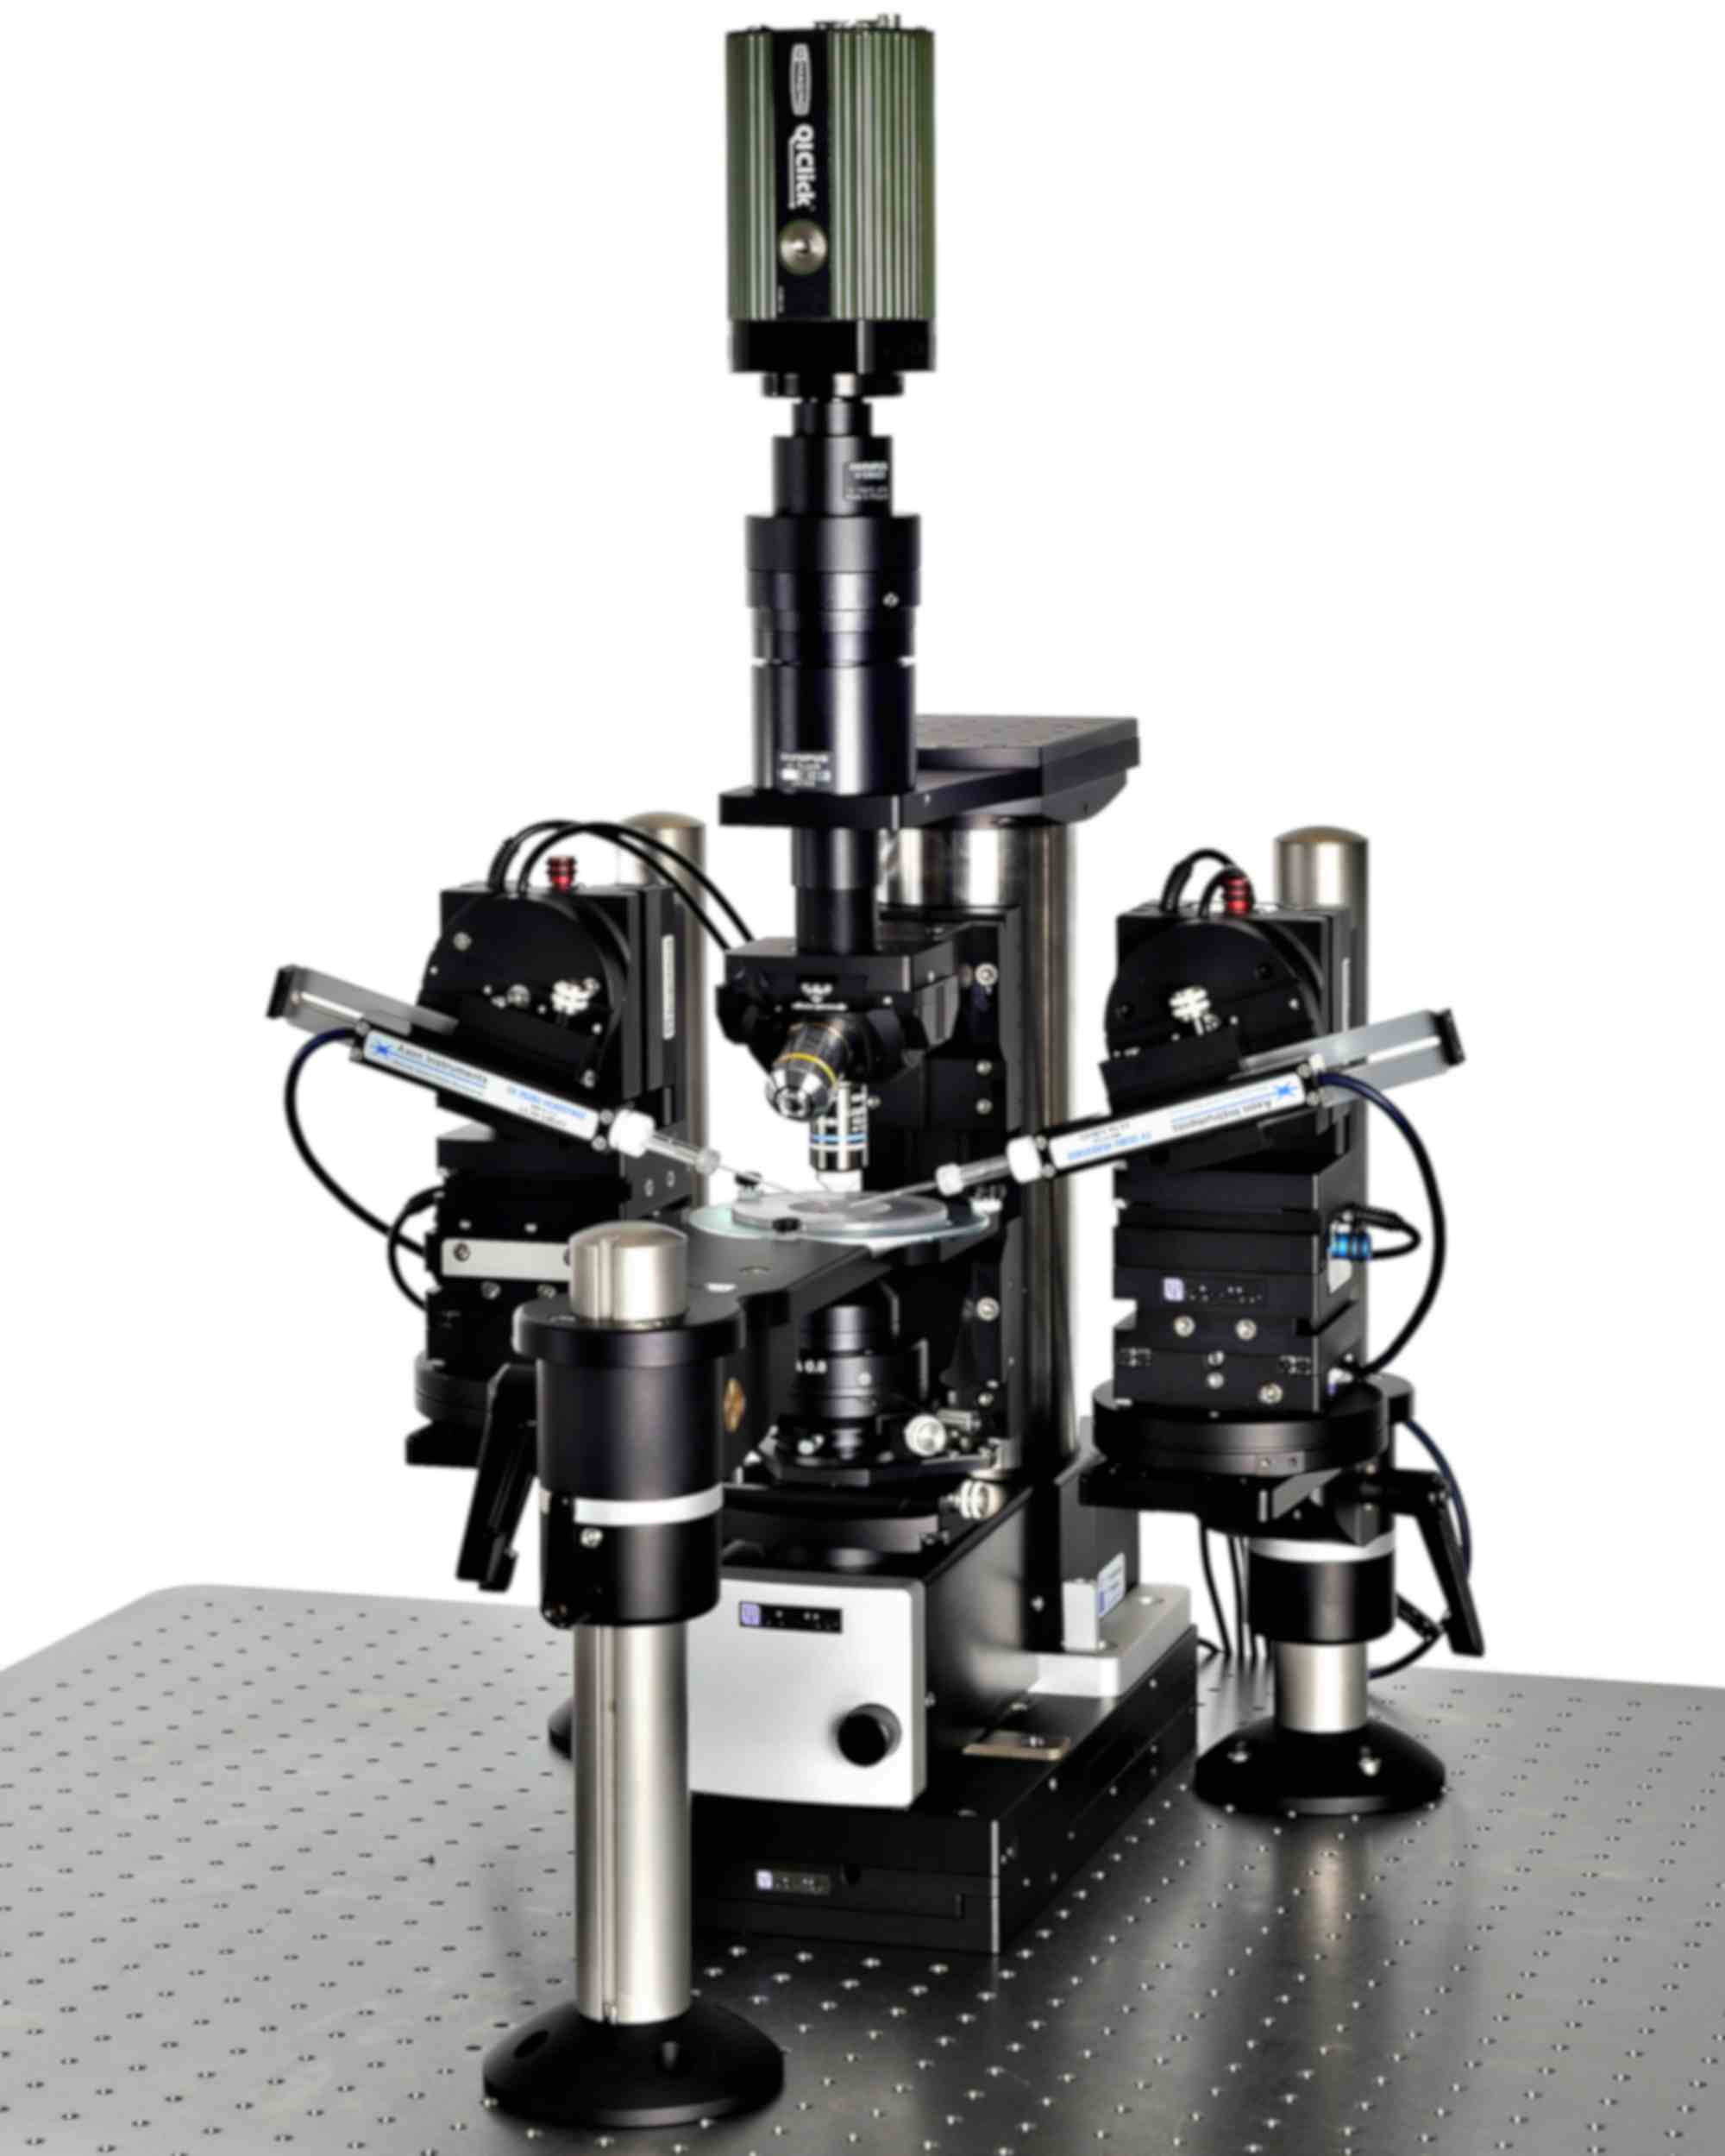 Integrated electrophysiology system for patch clamp recordings